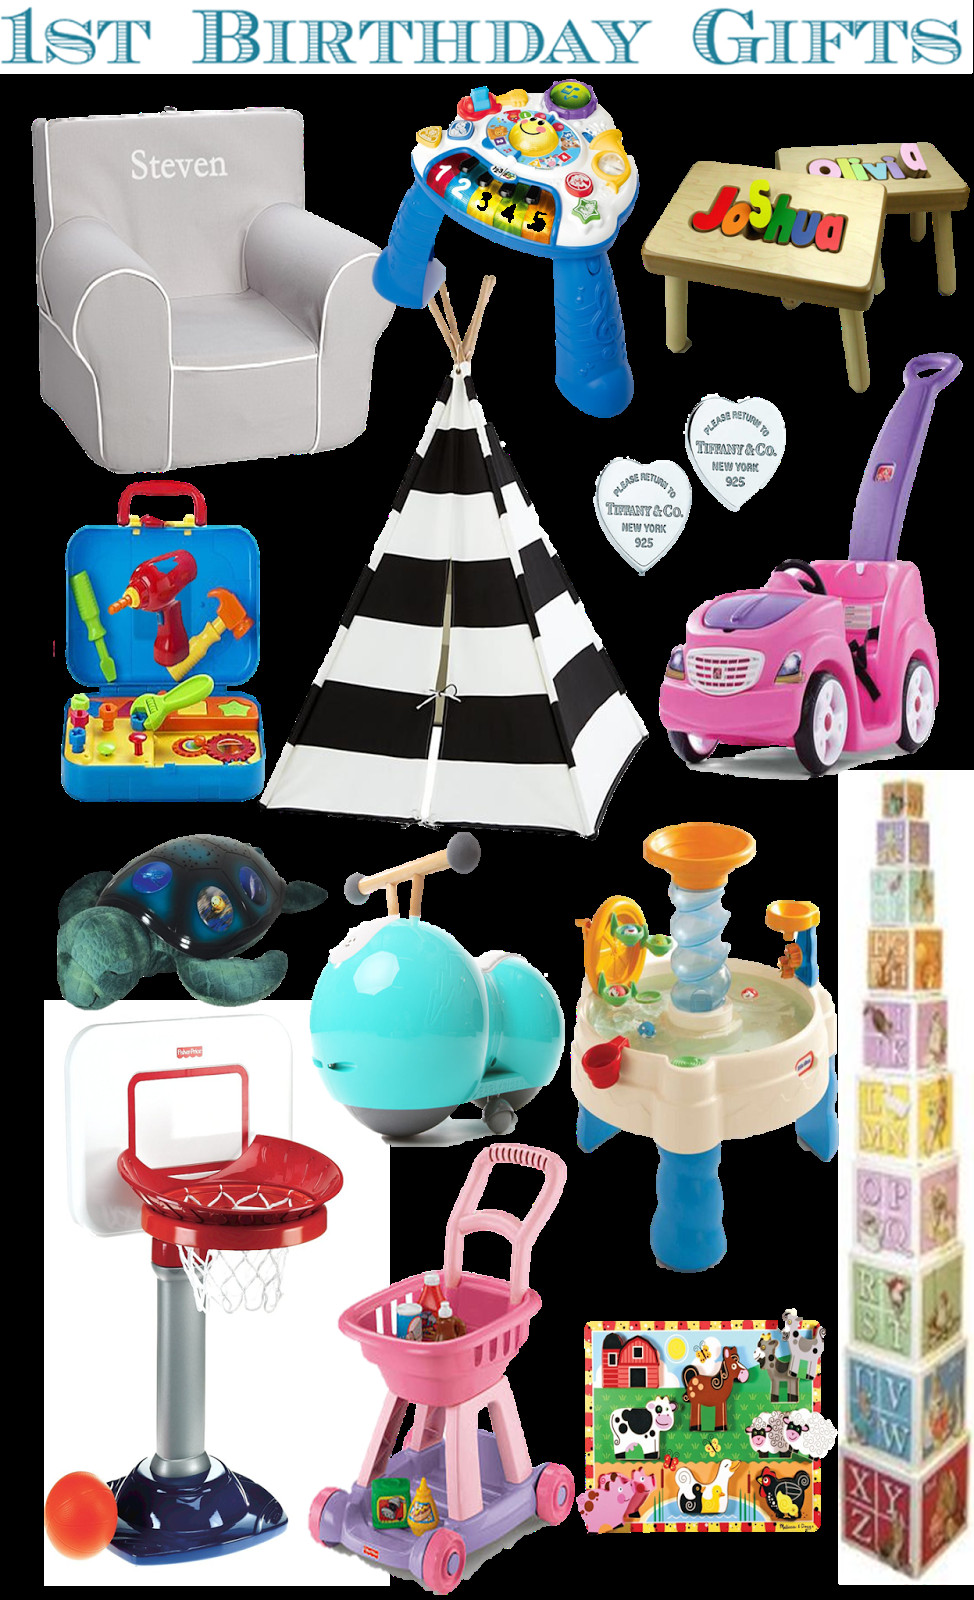 1St Birthday Gift Ideas For Daughter
 rnlMusings Gift Guide 1st Birthday Gifts